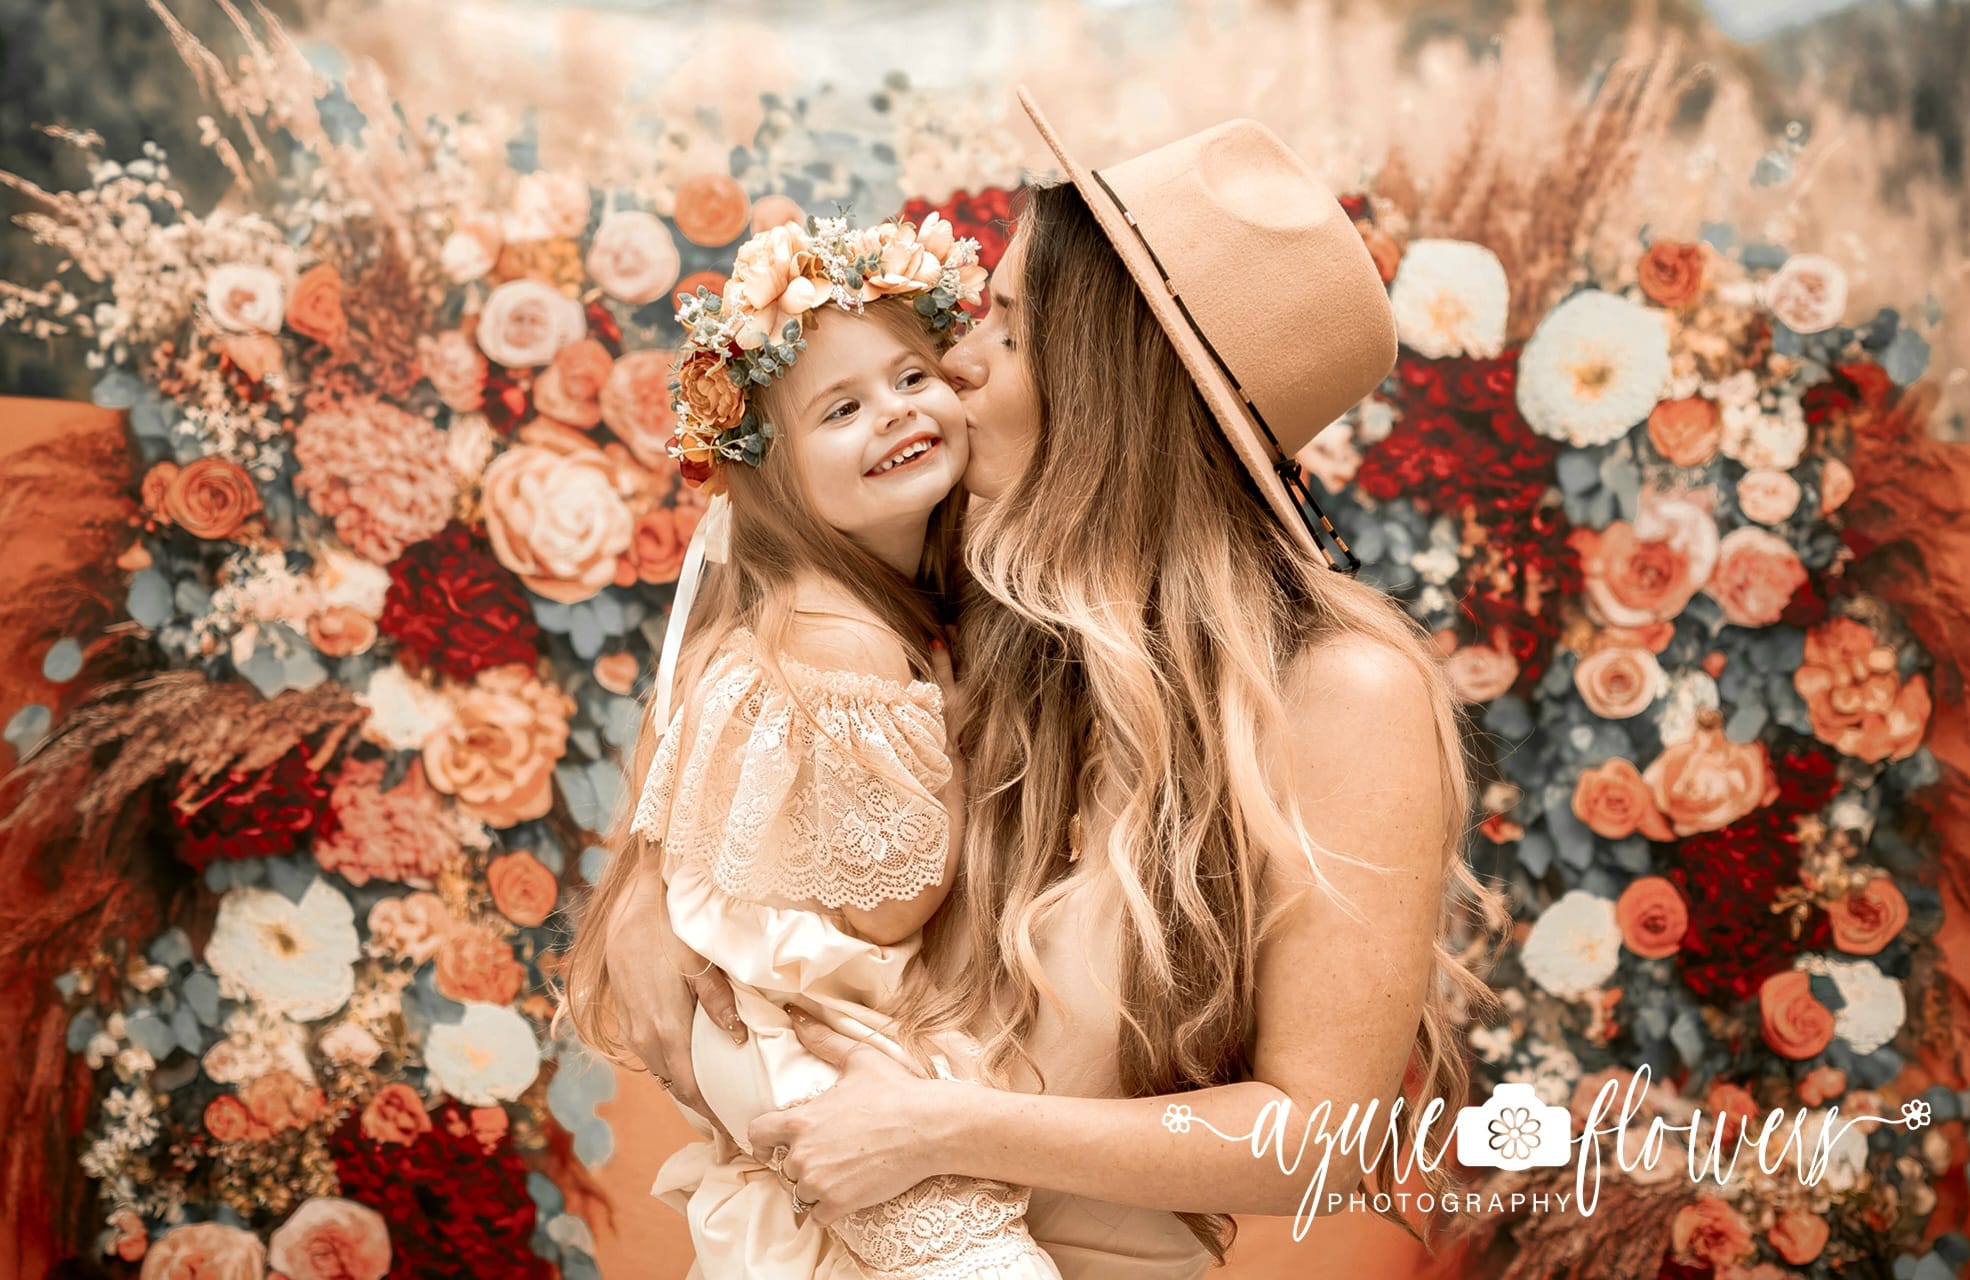 Kate Boho Flower Backdrop for photography Designed by Mini MakeBelieve